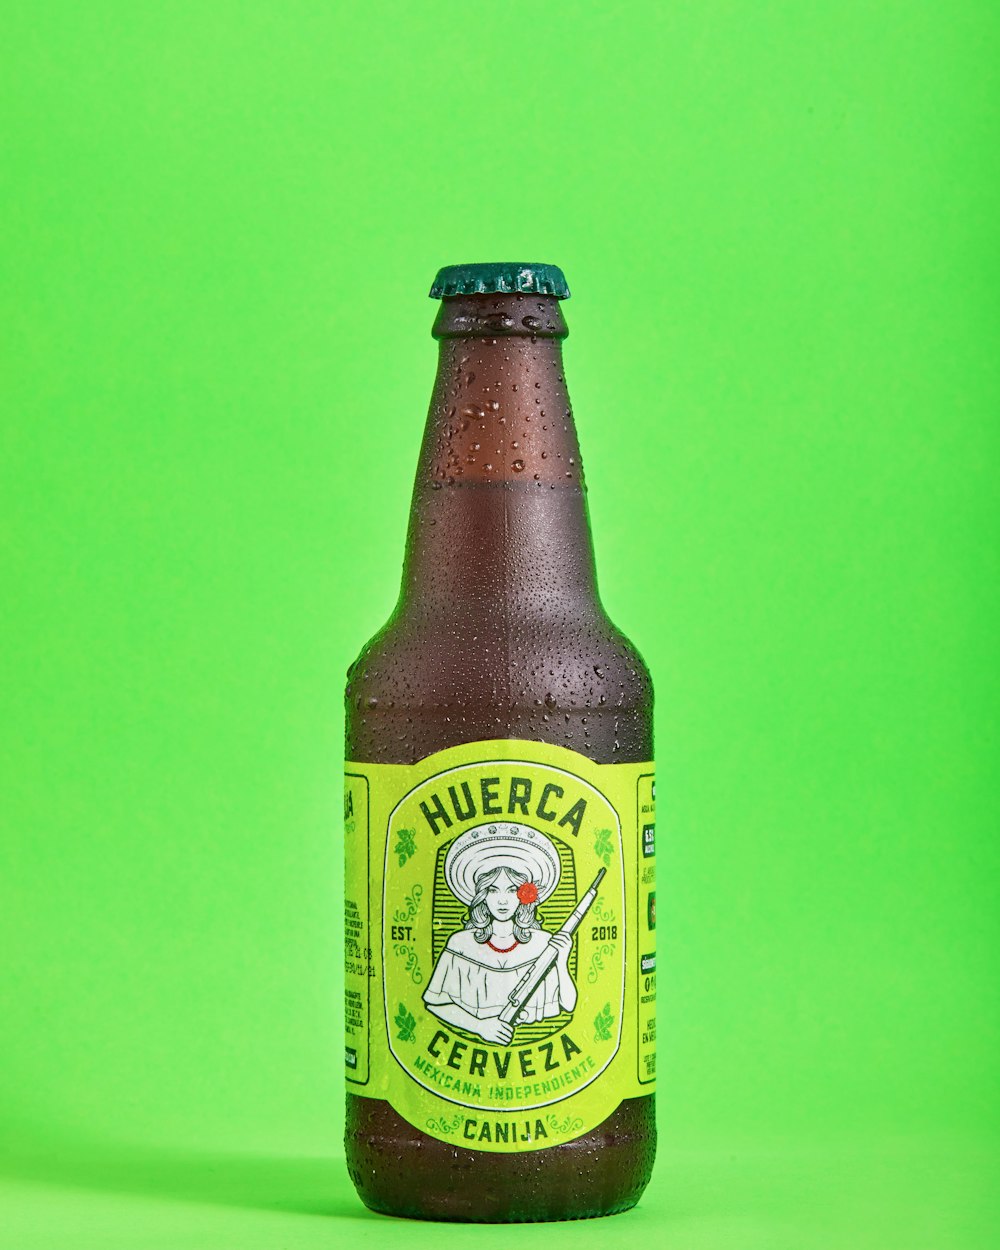 a bottle of beer on a green background